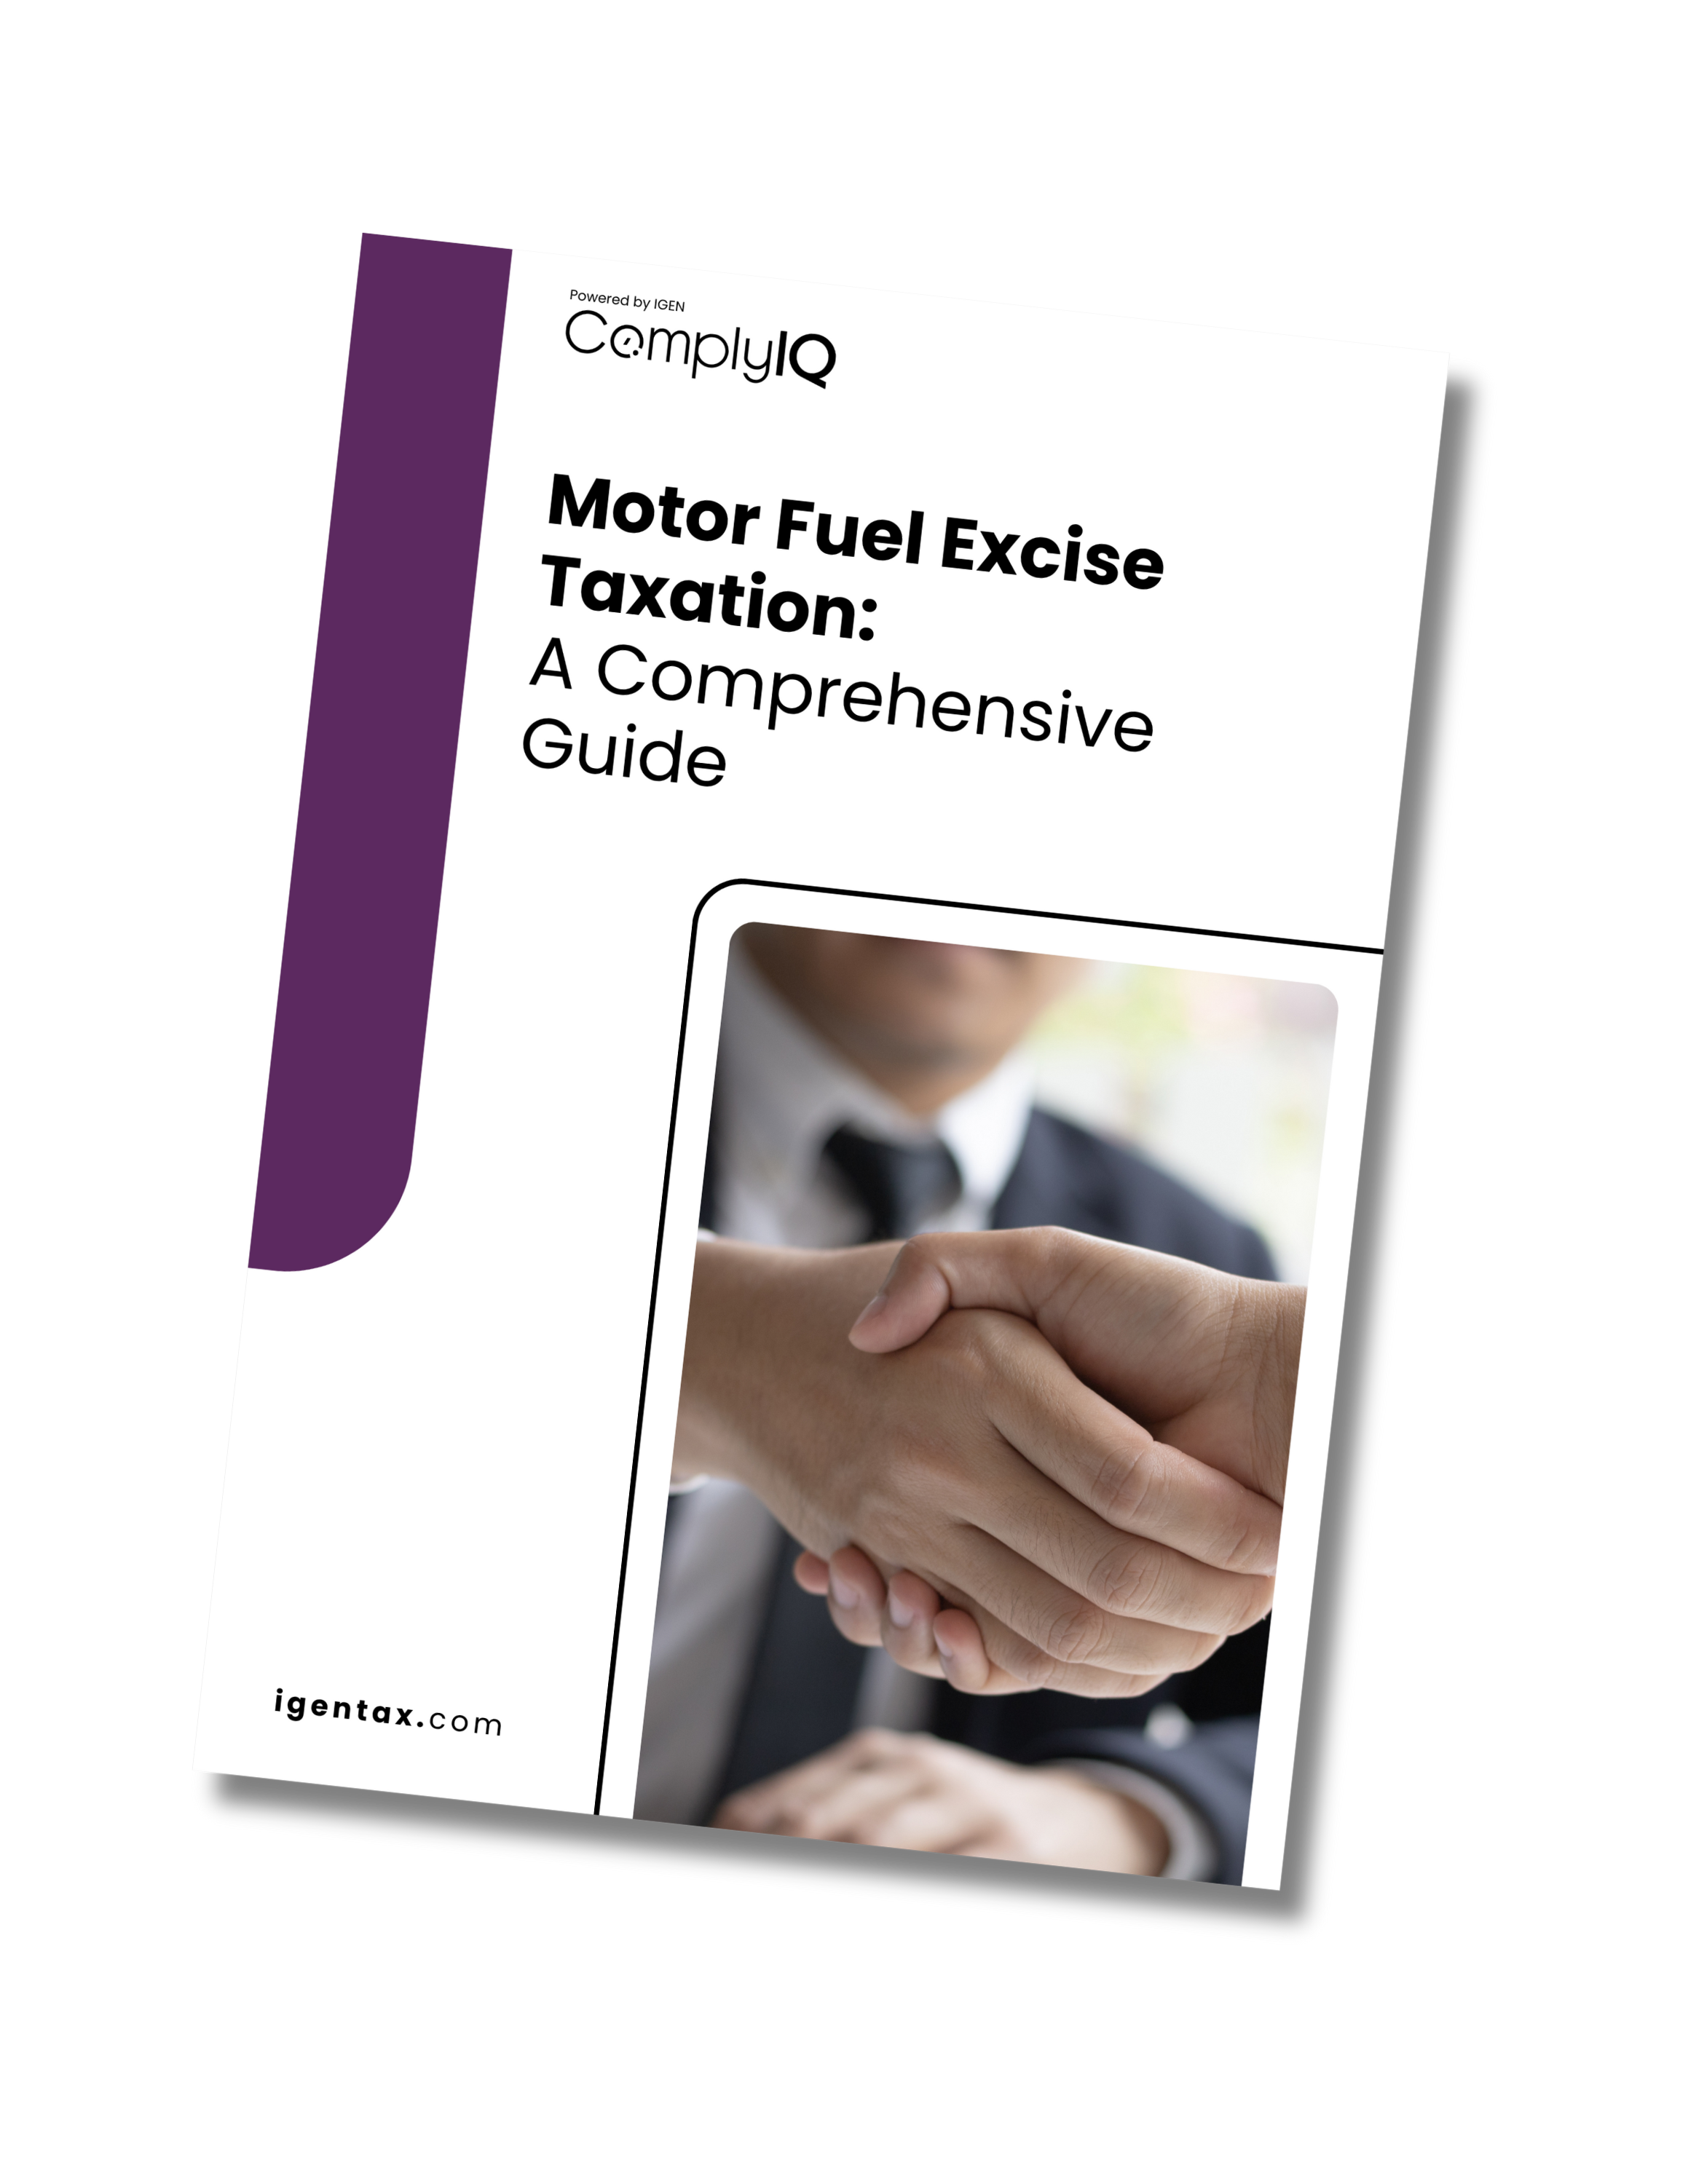 Motor fuel excise taxation a comprehensive guide